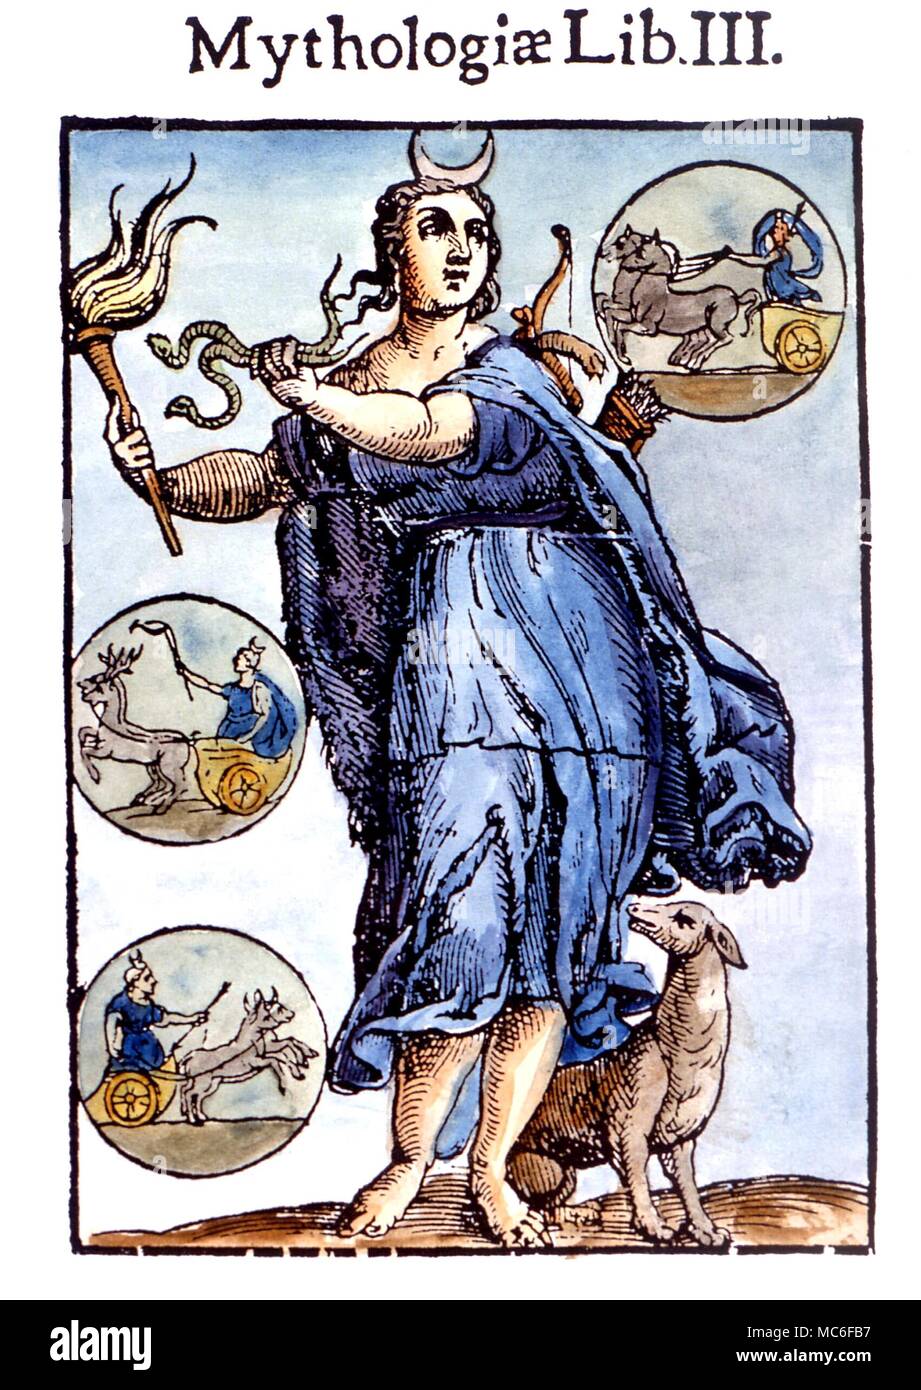 WITCHCRAFT - Hecate. Triple-headed Hecate, the ancient goddess of withces. After the 'Mythologiae' of Comitis, c. 1680 Stock Photo